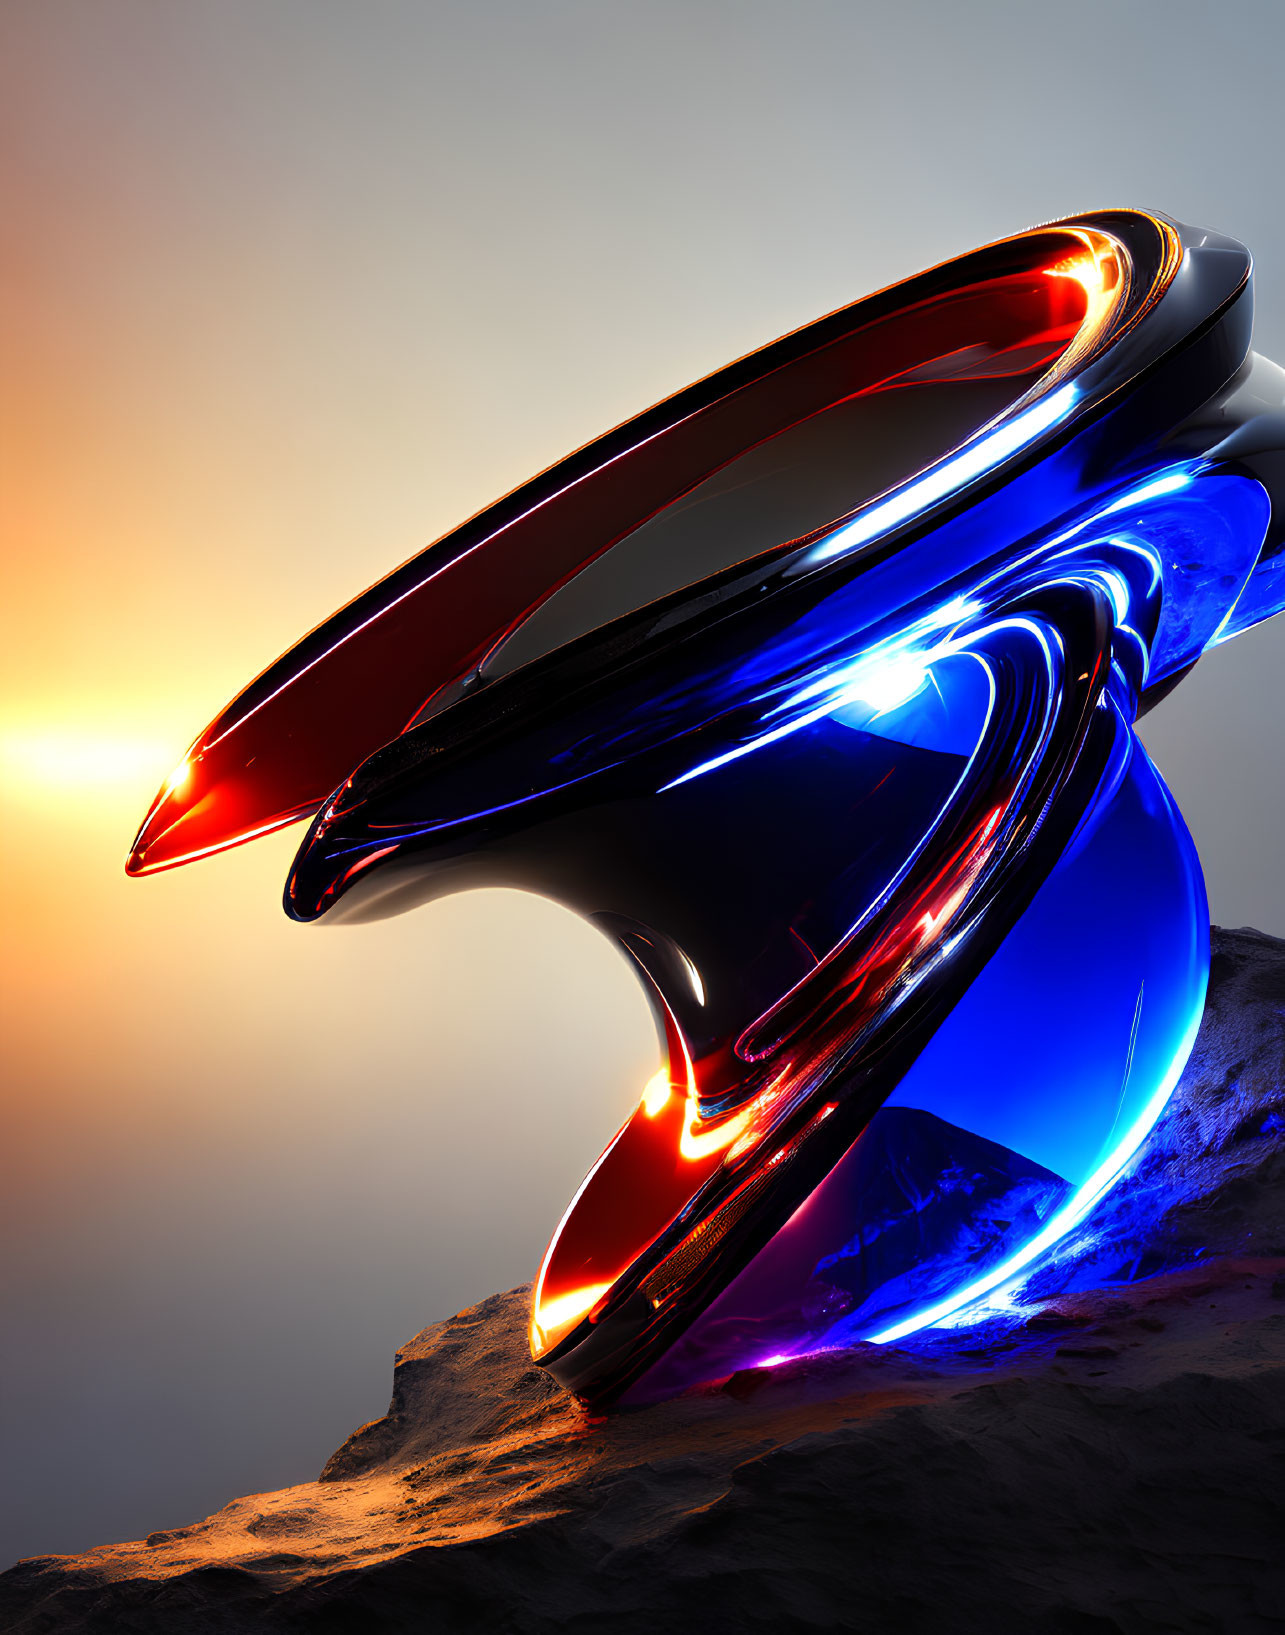 Abstract Sculpture with Reflective Blue and Red Surfaces Against Sunset Sky